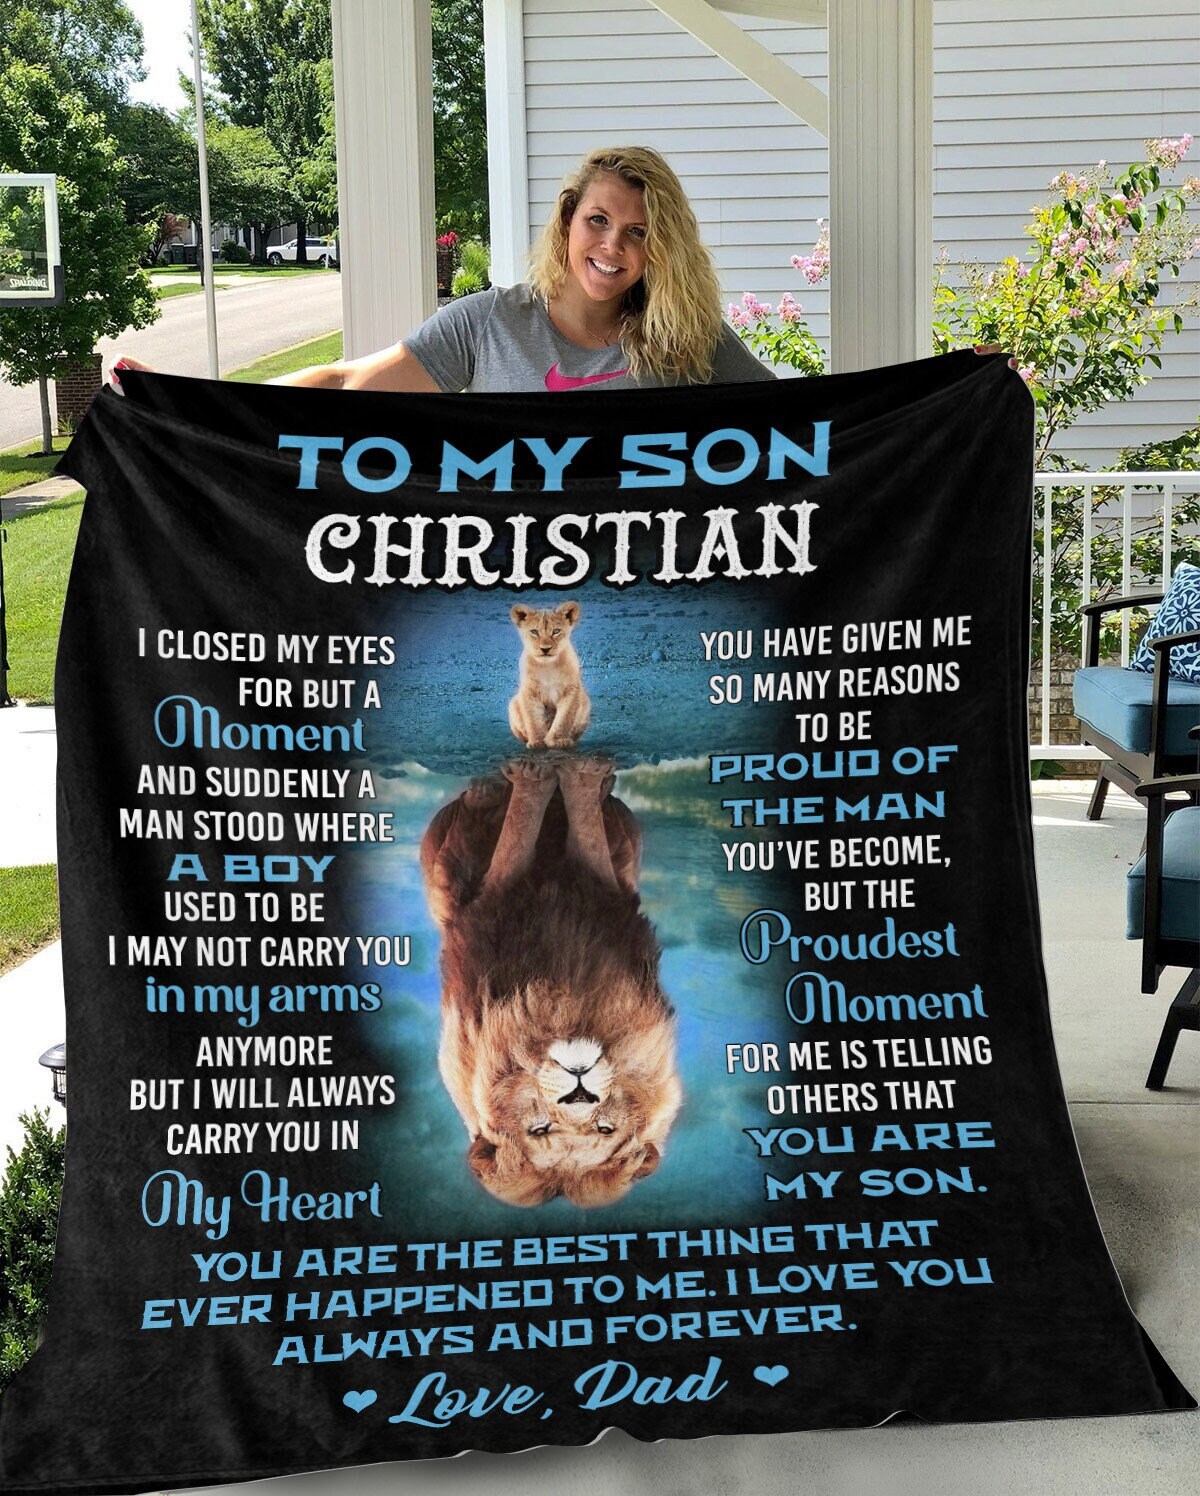 Son Gifts Blanket To My Son Son Gifts From Mom/Dad Funny Gifts For Son  Blanket Best Birthday Gift Ideas For Son Gifts For Grown Son Son Gift From  Mother Or Father Blankets,32x48''(#355,32x48'')O 